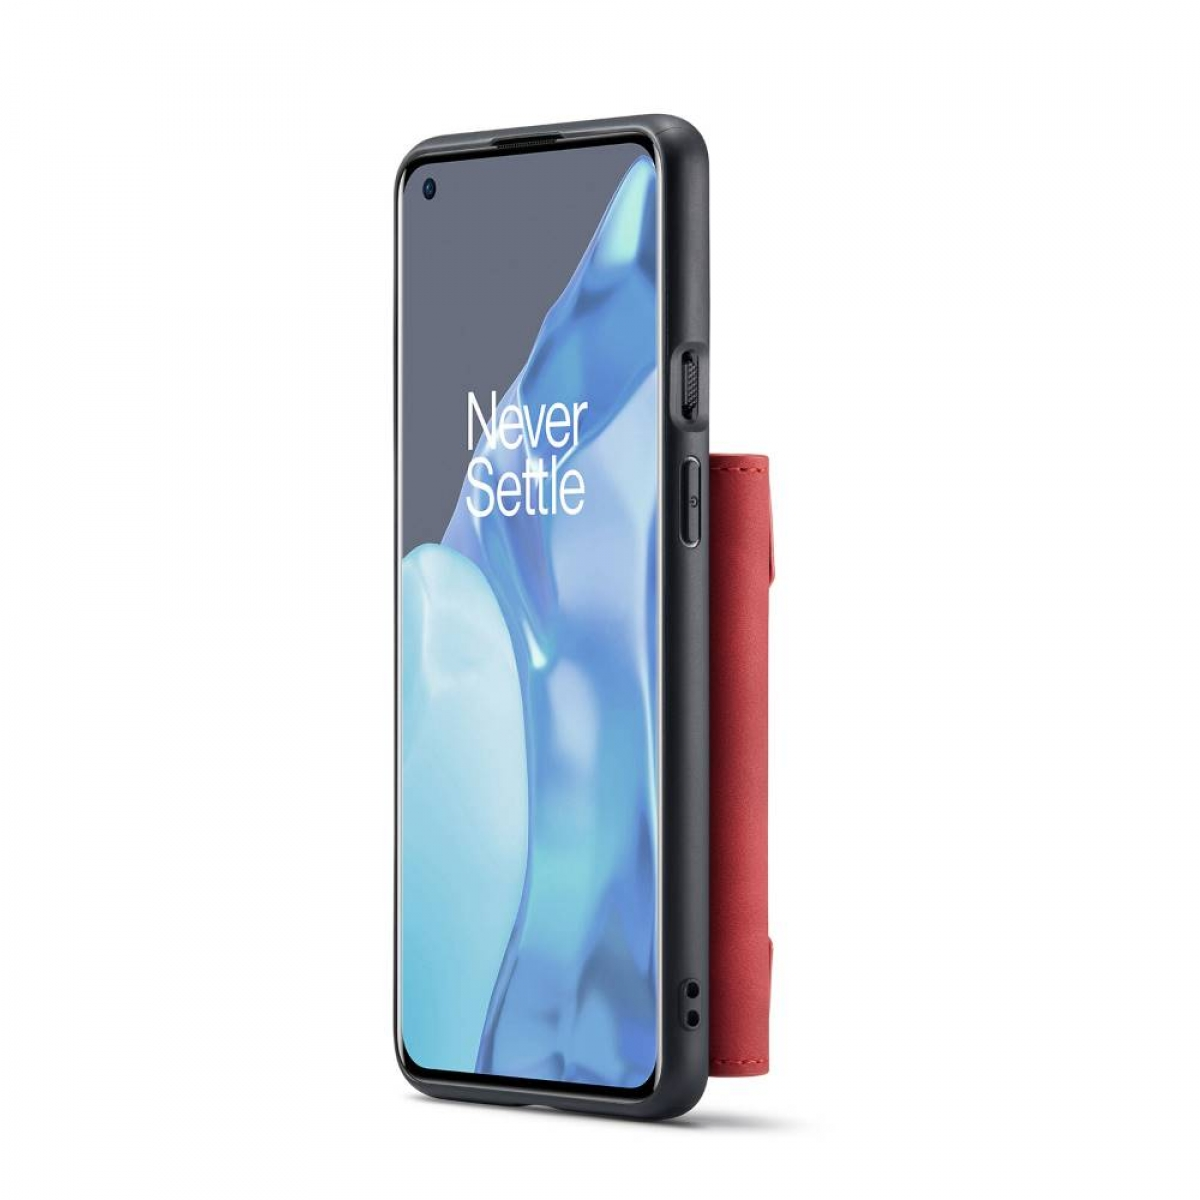 OnePlus, M2 MING Backcover, DG 2in1, 9, Rot